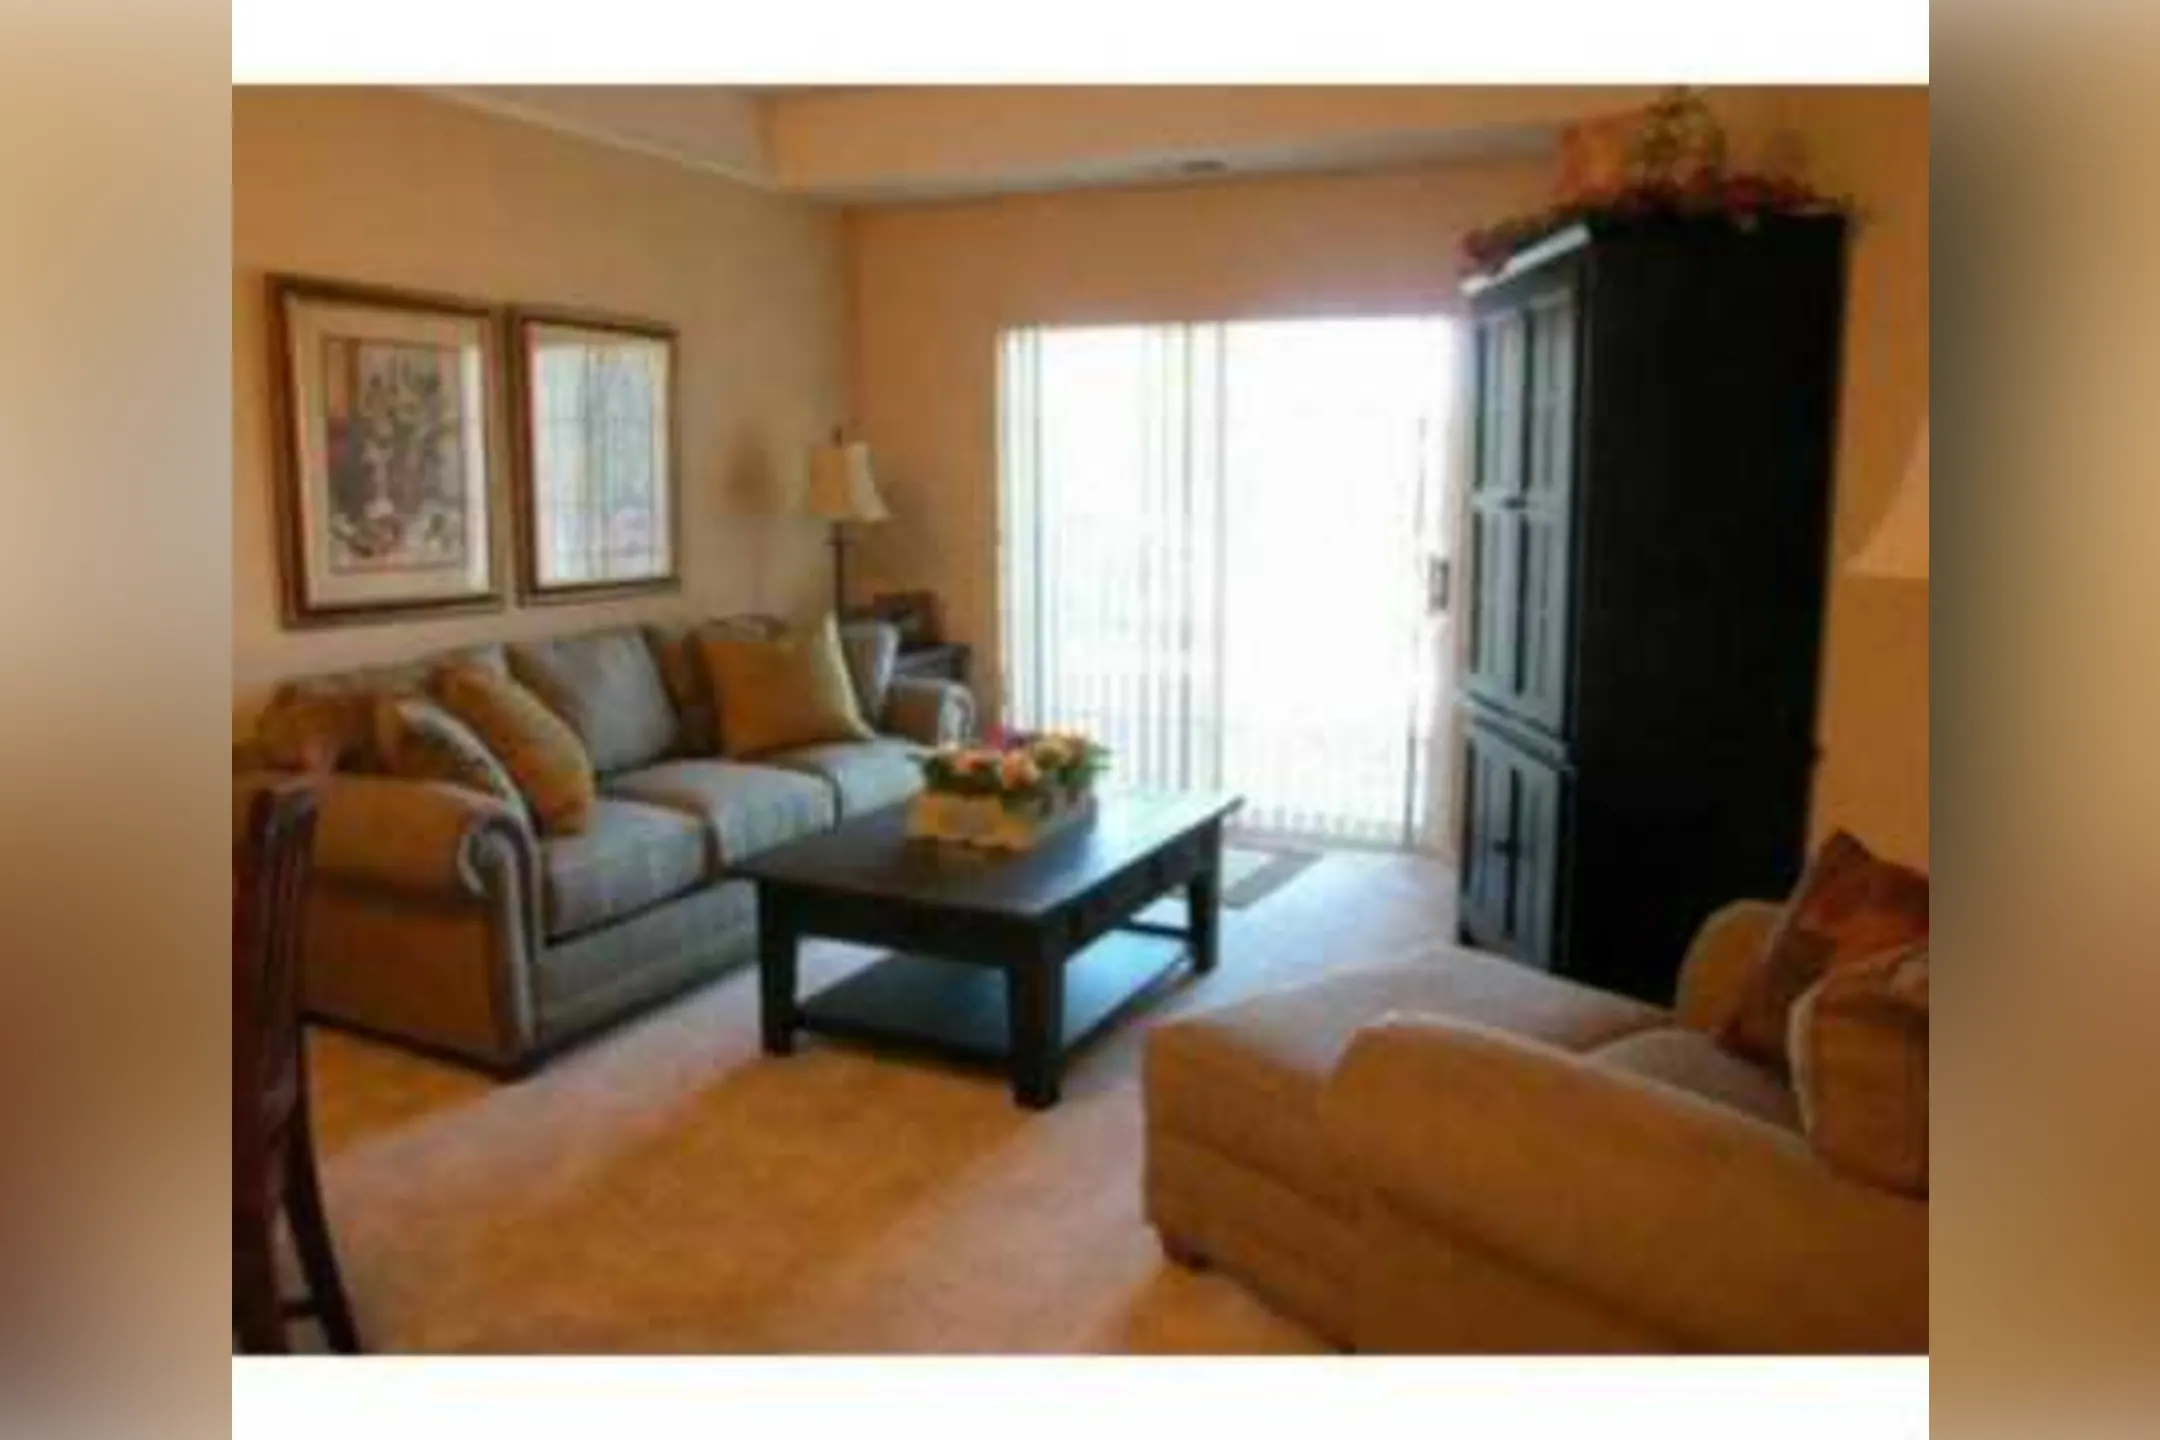 Living Room - Blackberry Pointe Apartments - Inver Grove Heights, MN